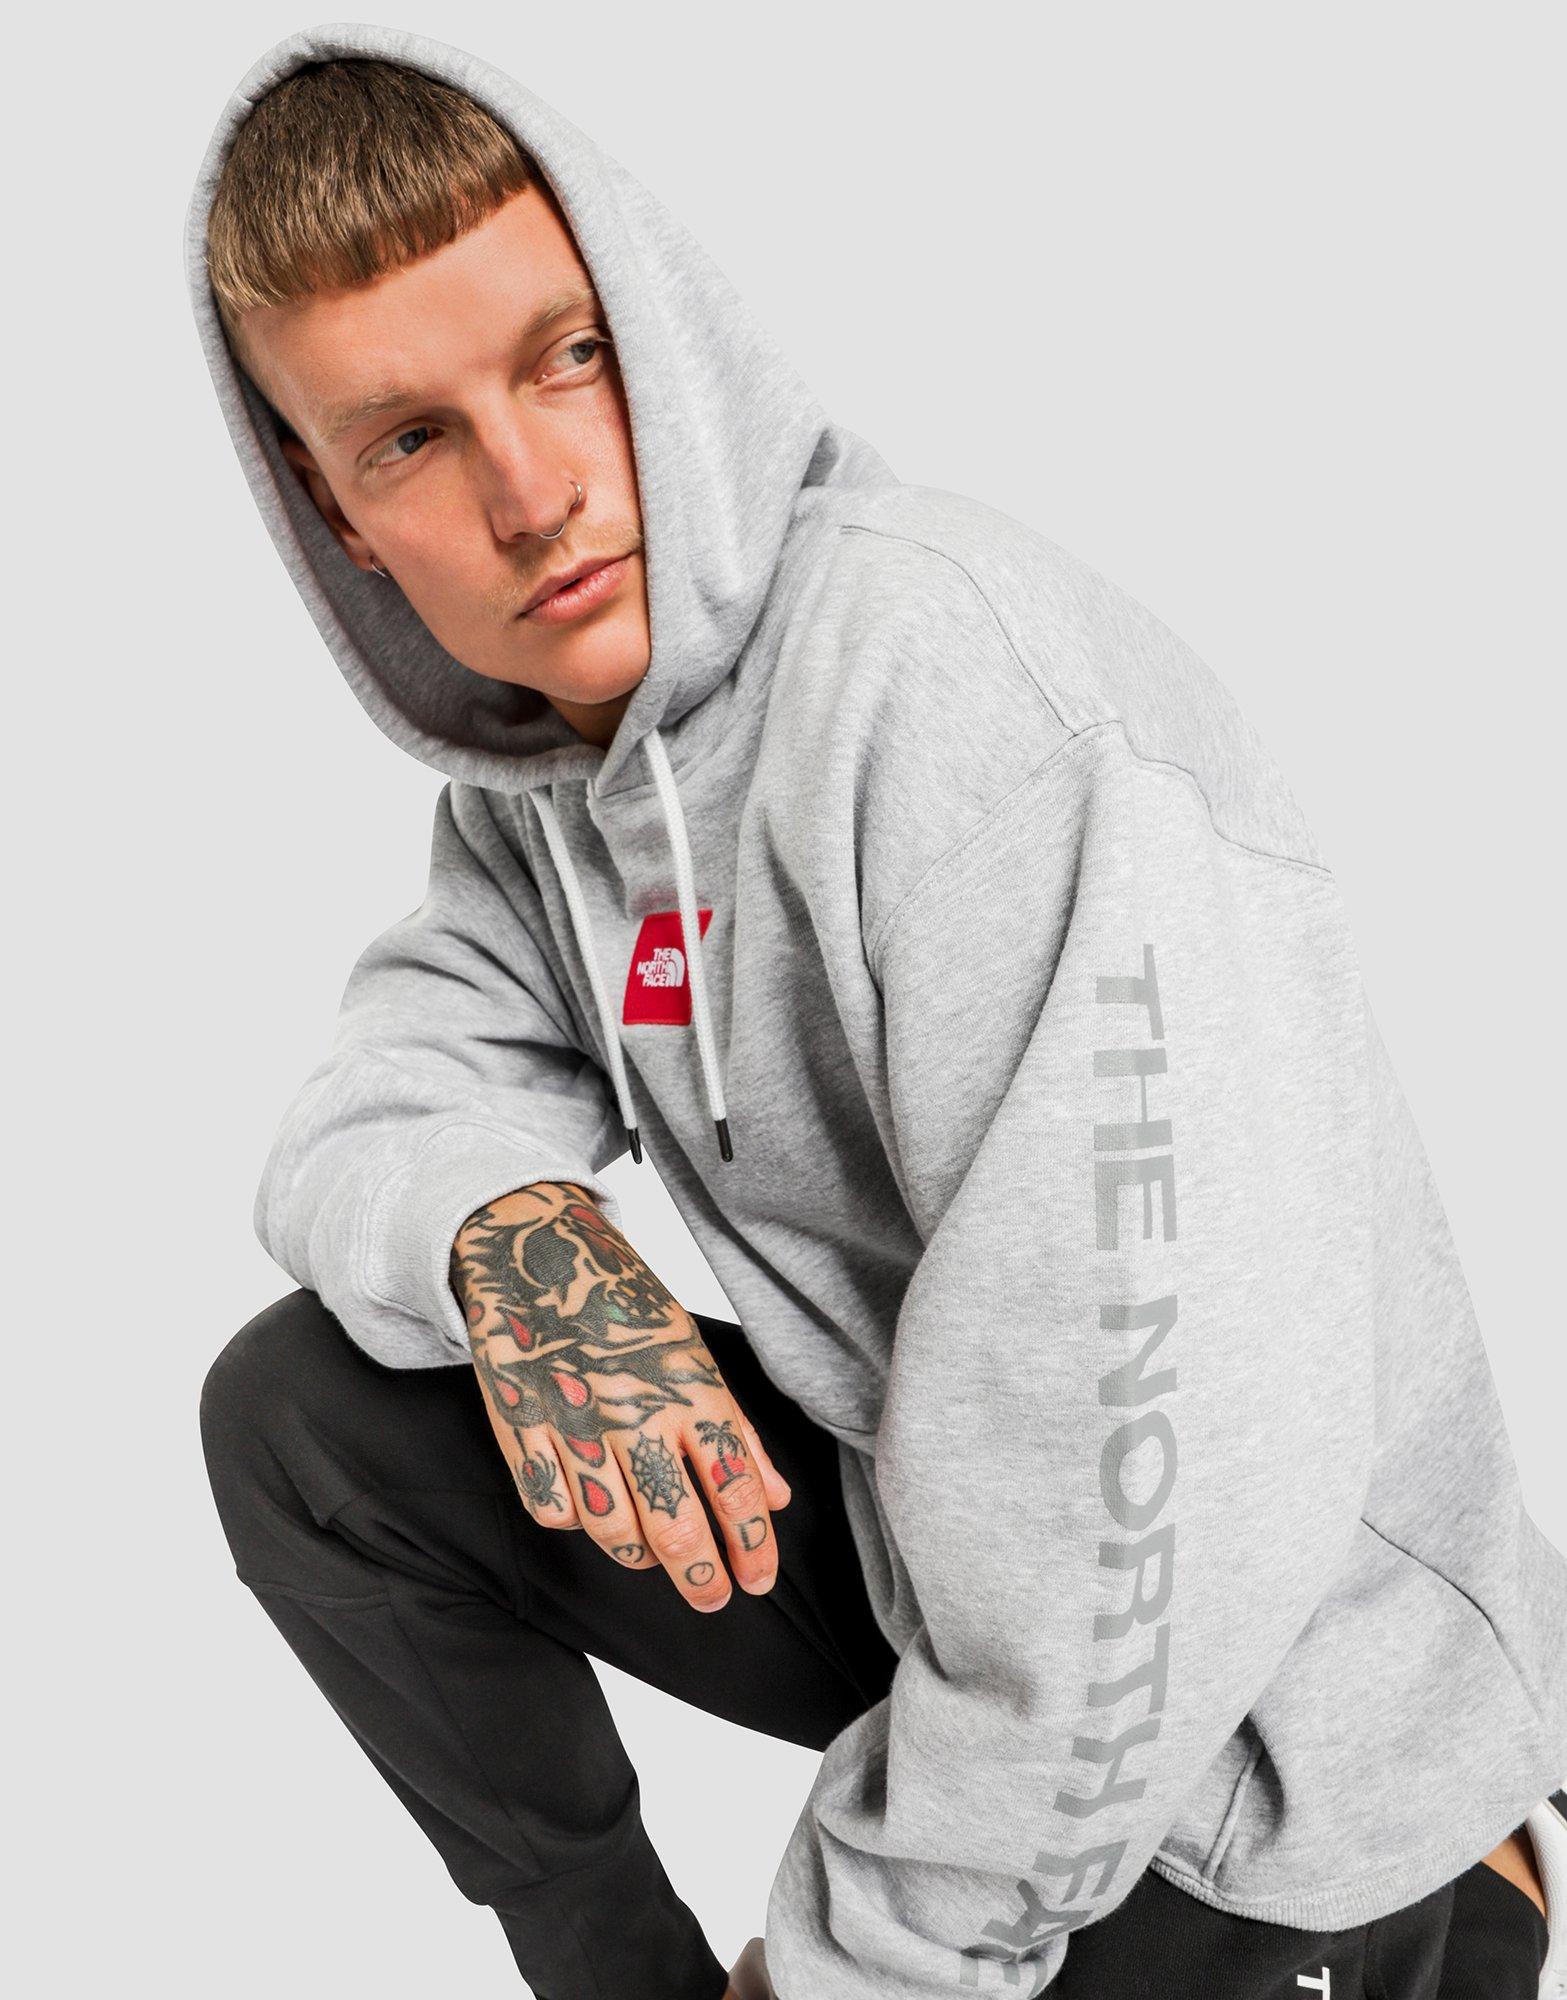 north face overhead hoodie